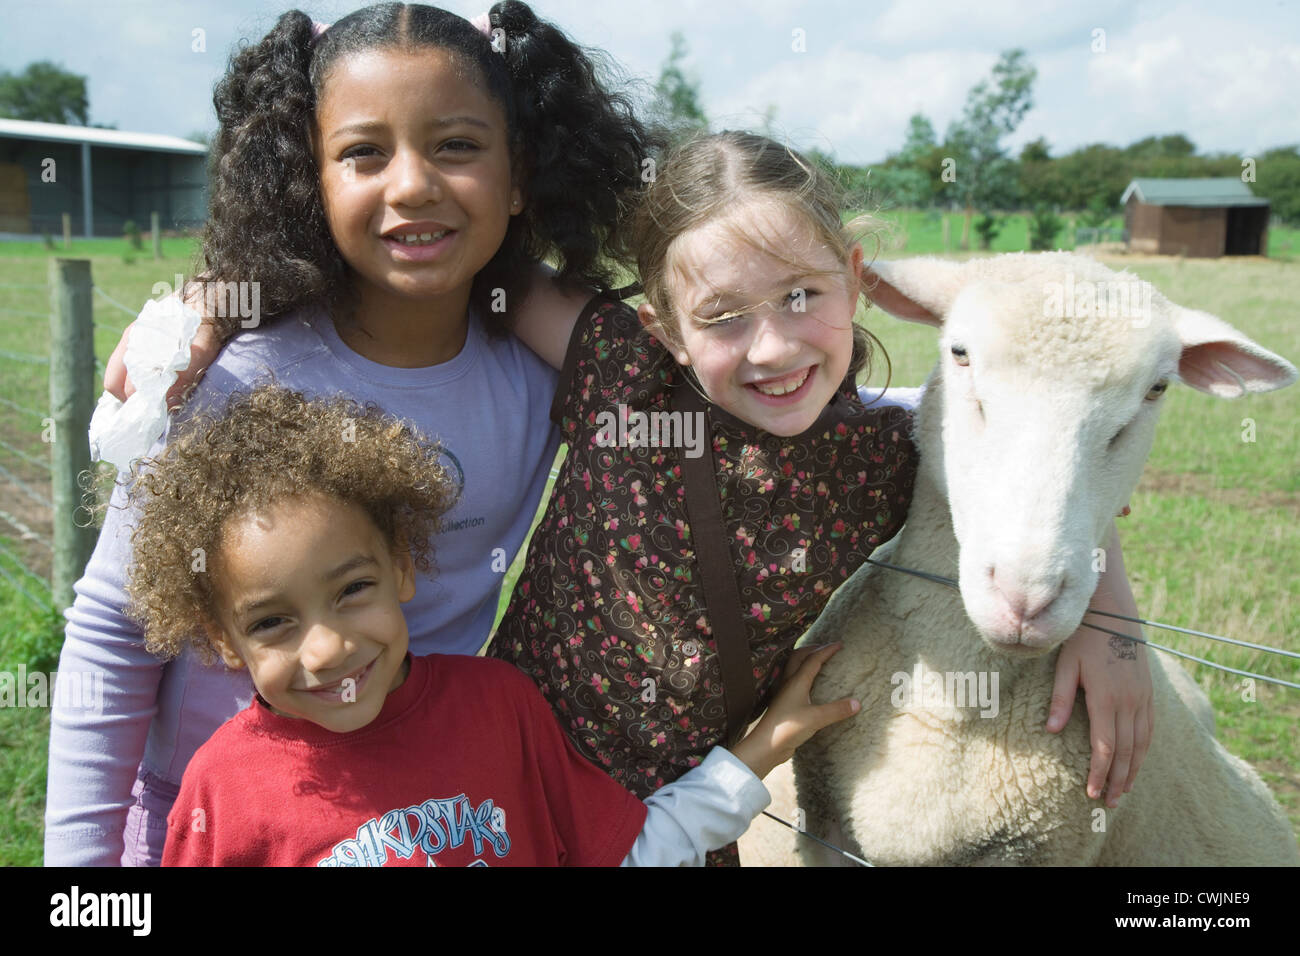 Children stroking a sheep on a visit to a city farm, Stock Photo